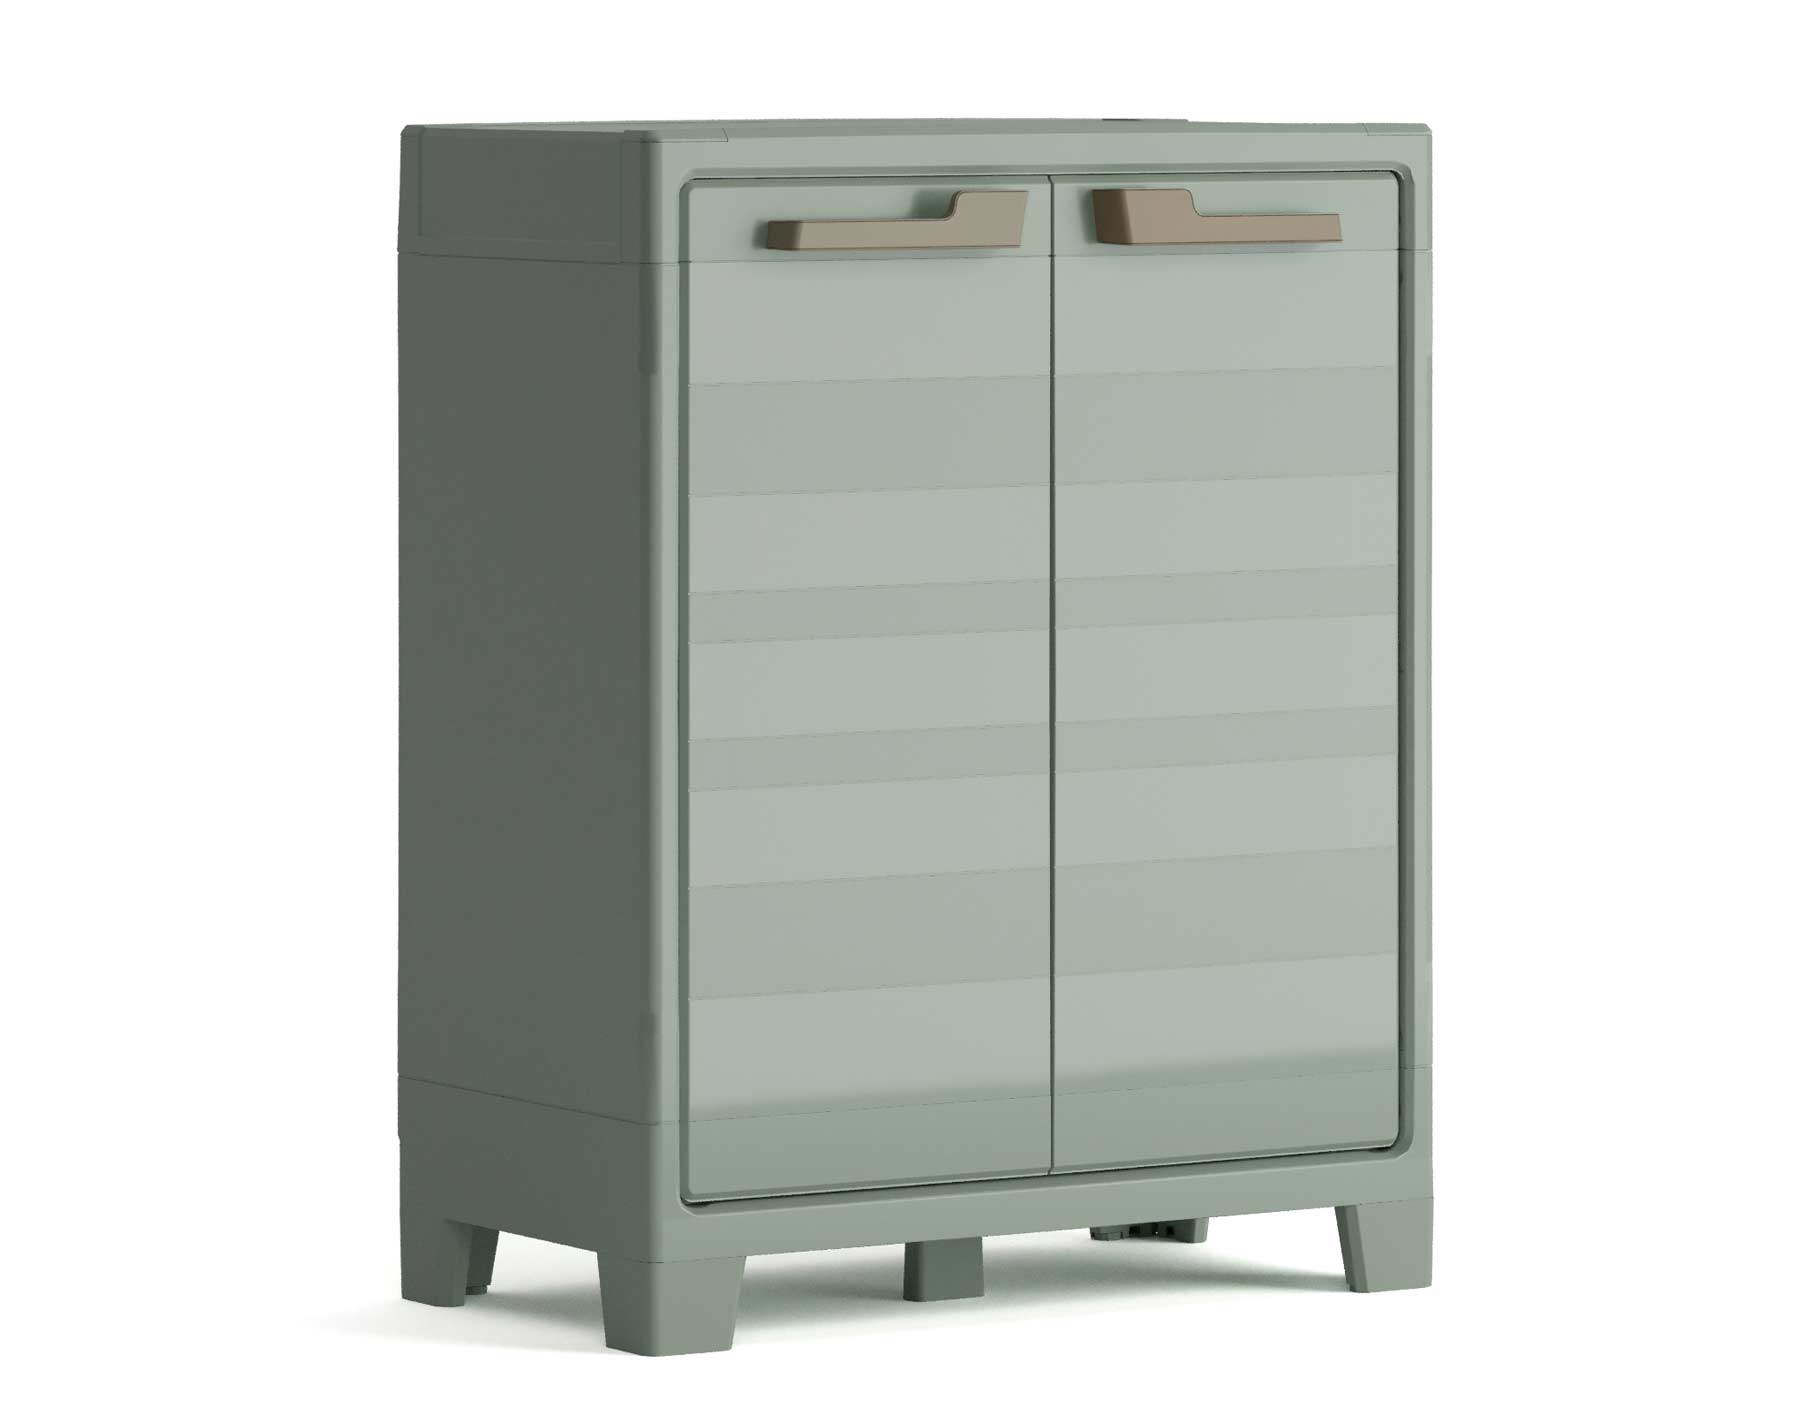 Planet Base Outdoor Cabinet